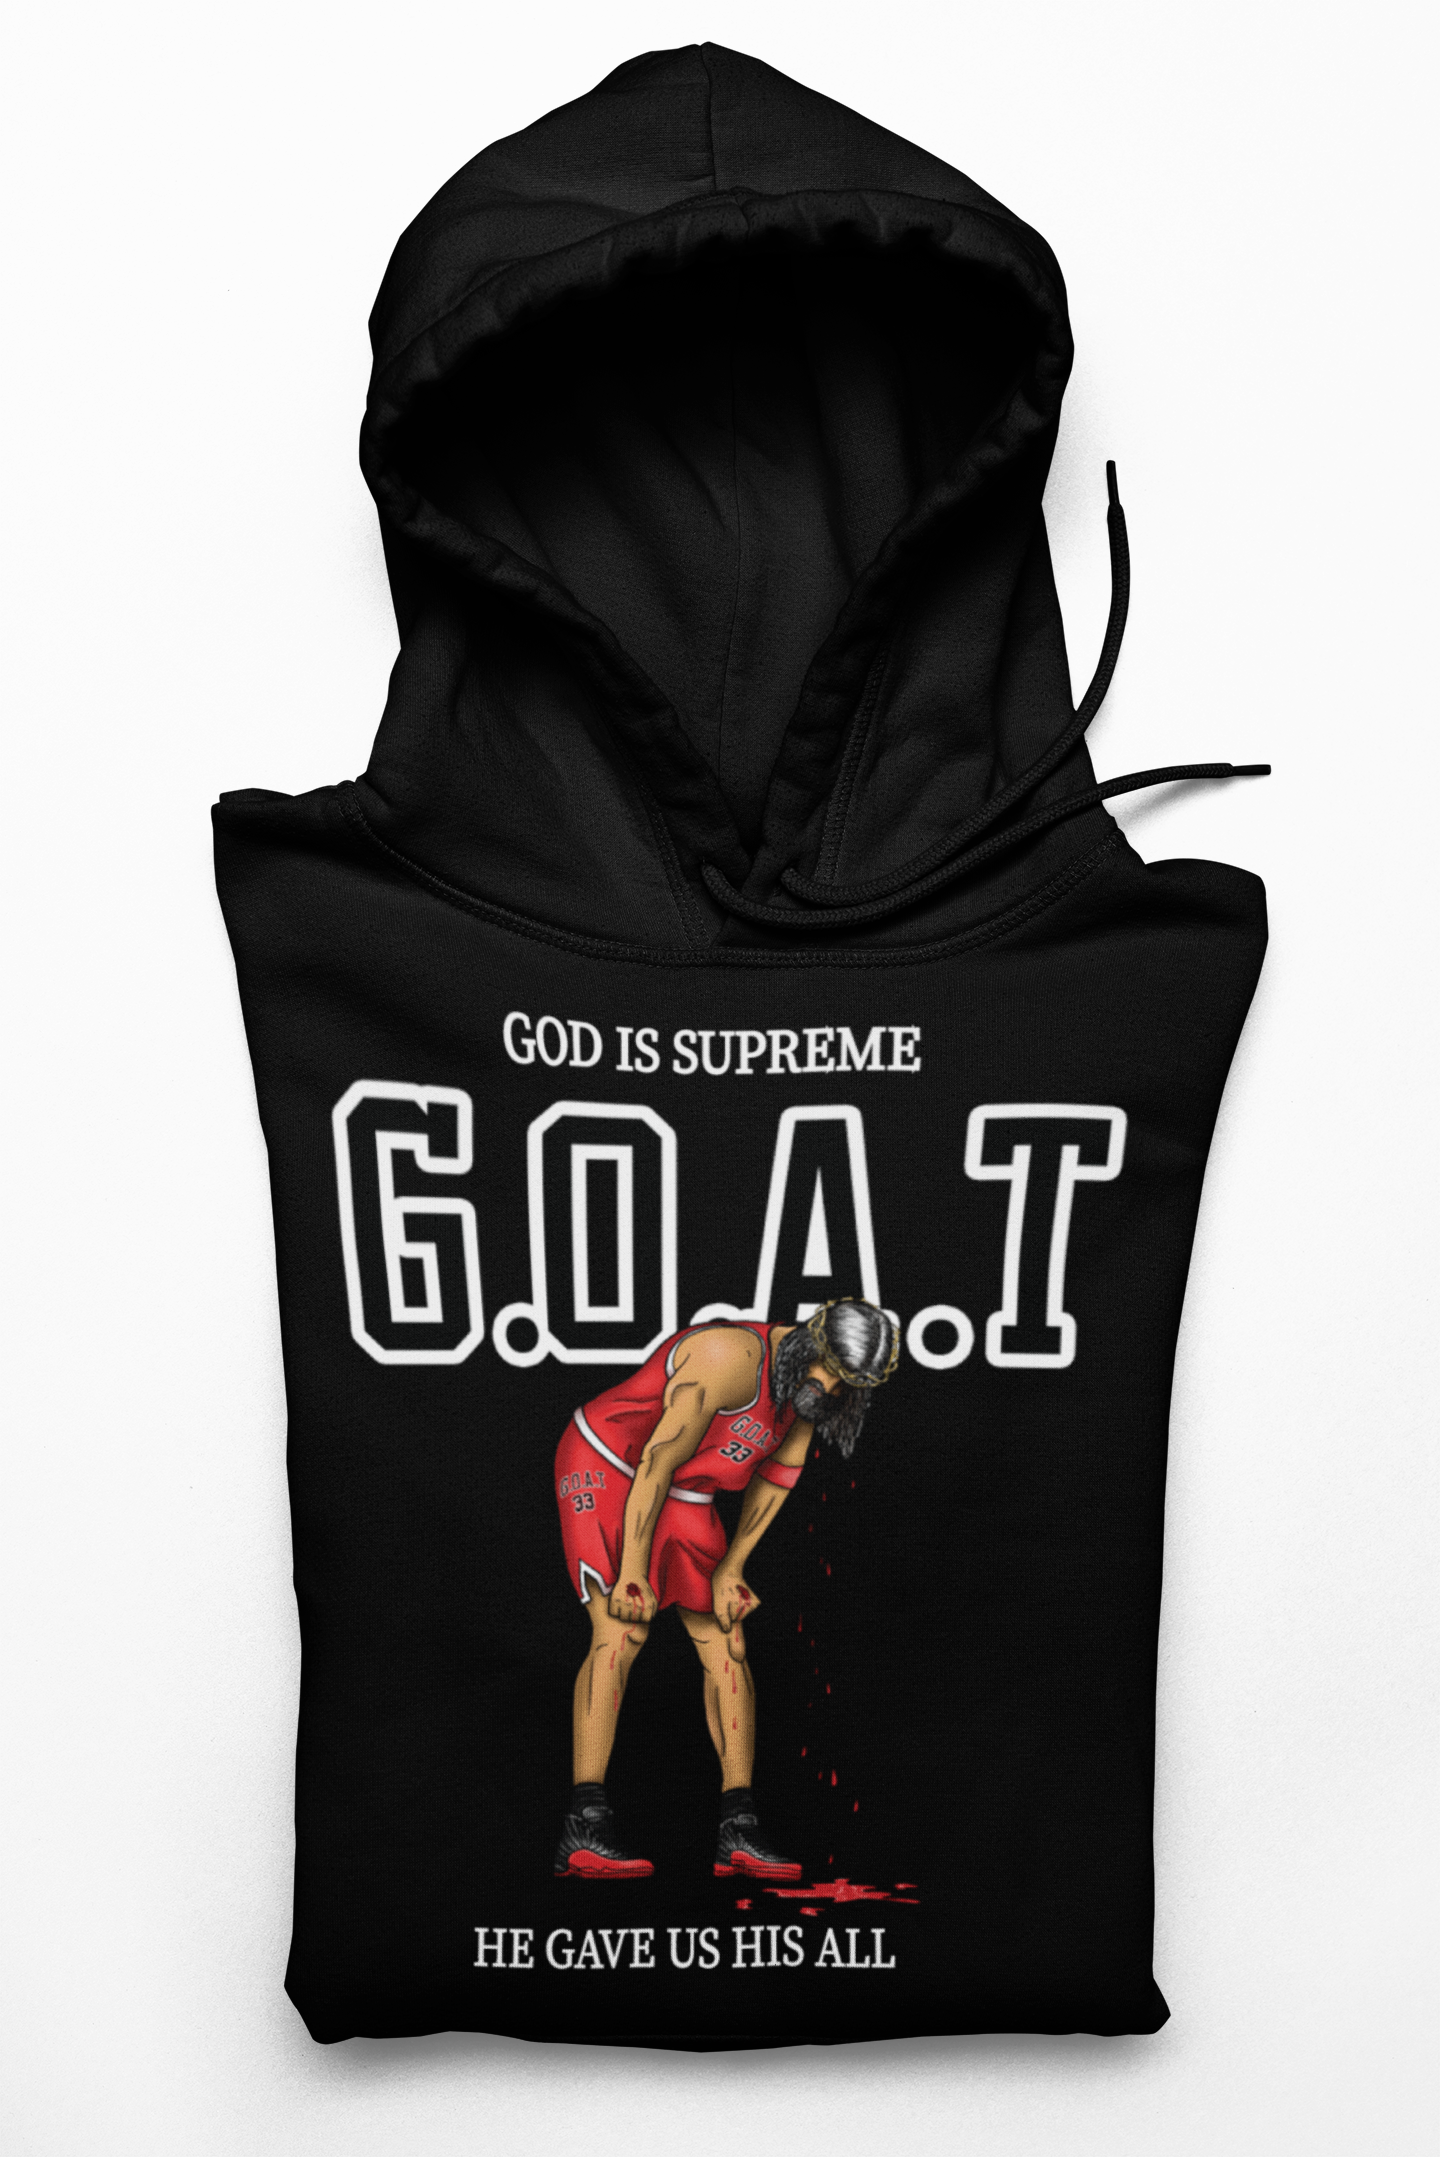 G.O.A.T (Greatest of All Time) Black Hoodie